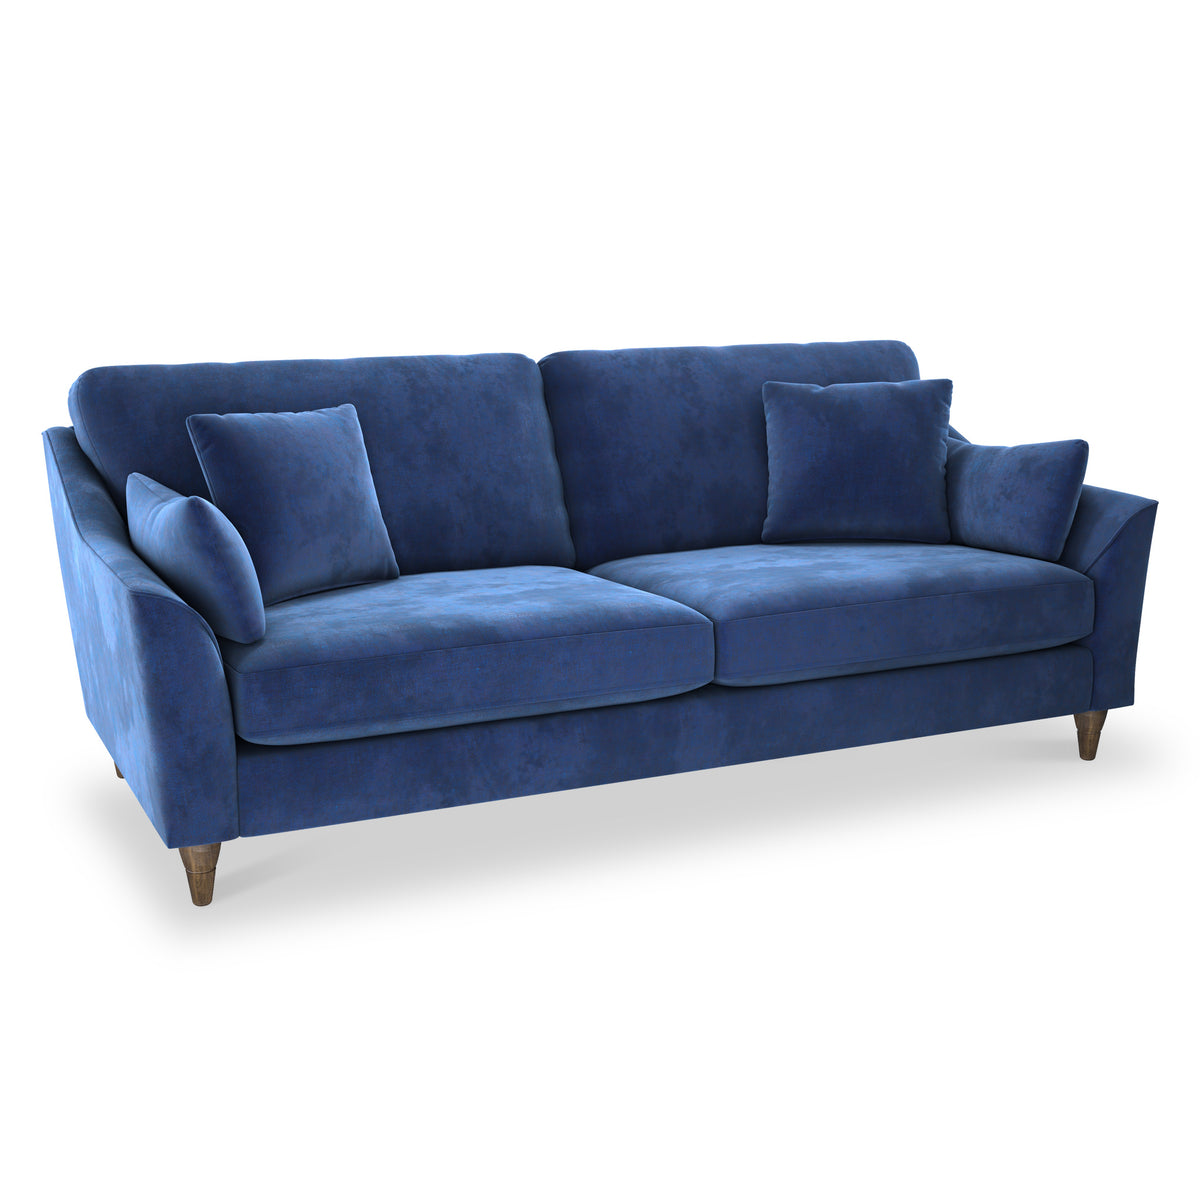 Charice Navy 3 Seater Sofa from Roseland Furniture